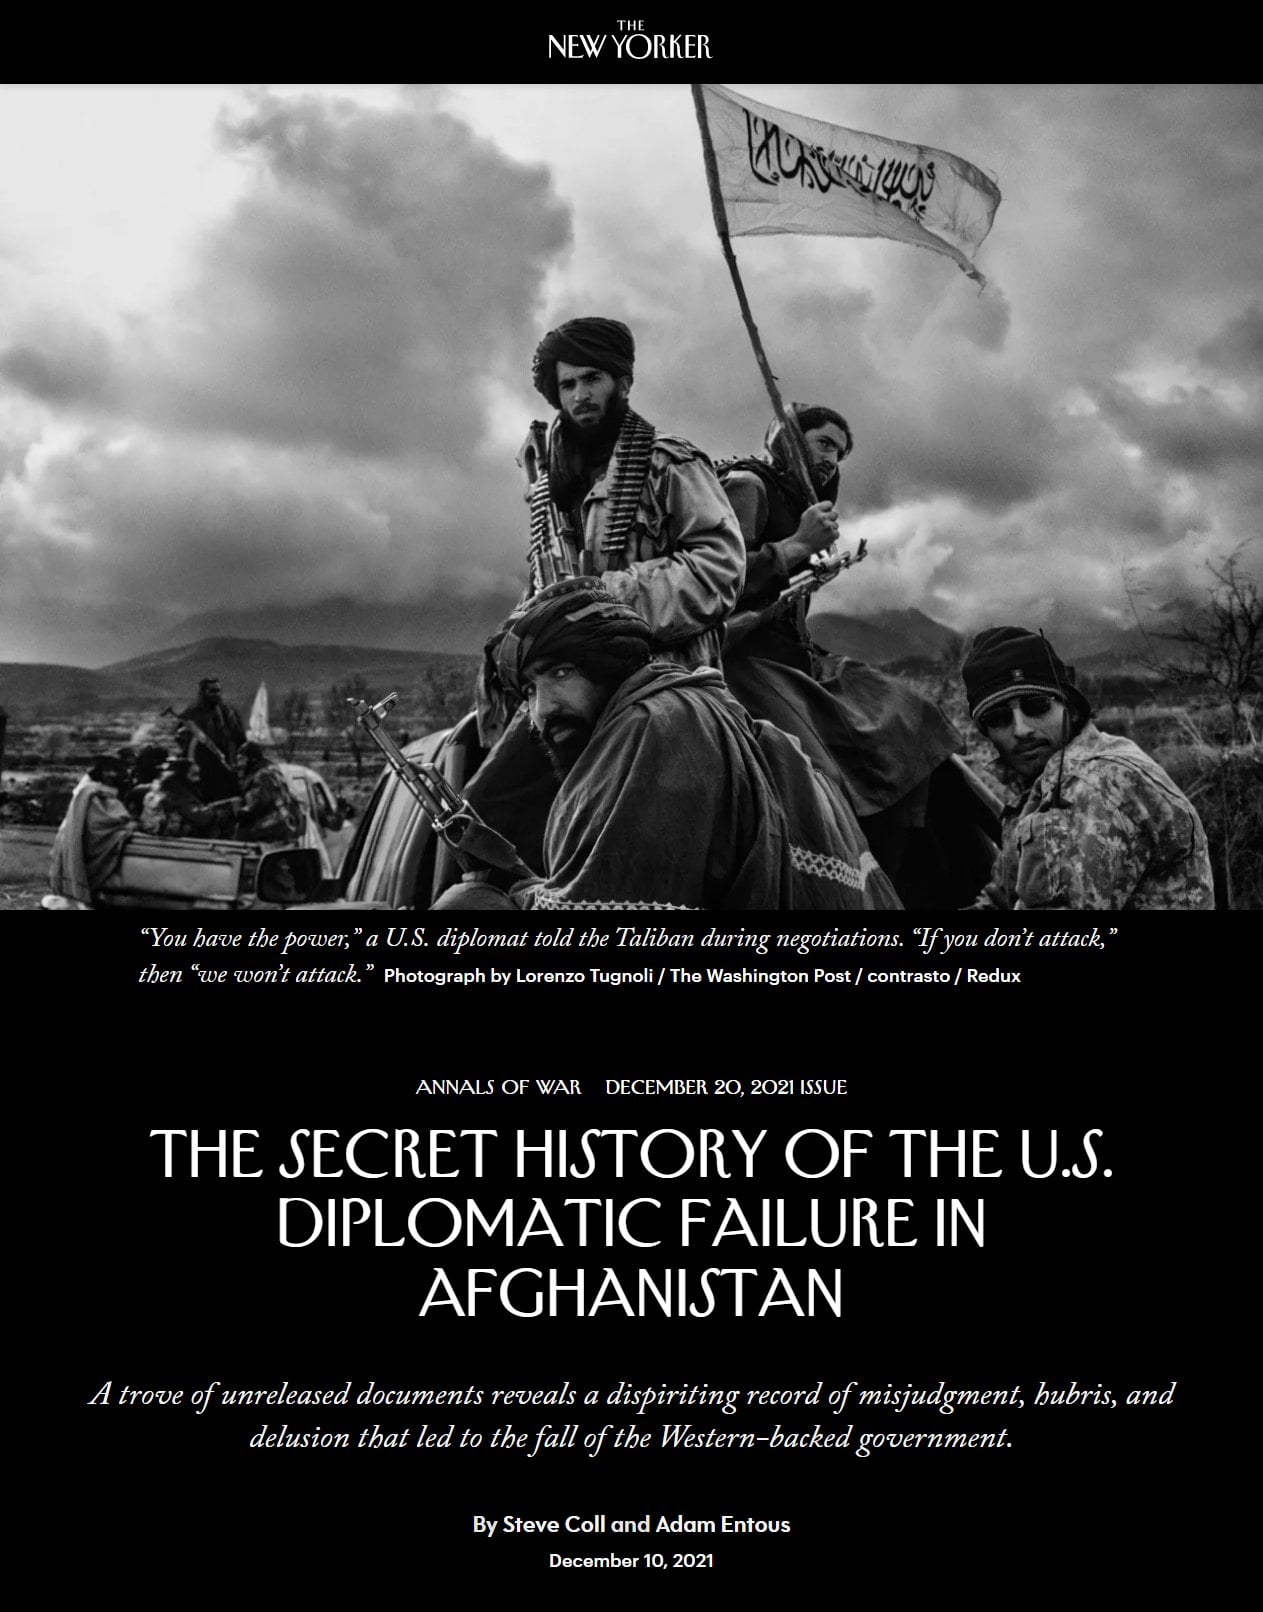 The Secret History of the U.S. Diplomatic Failure in...